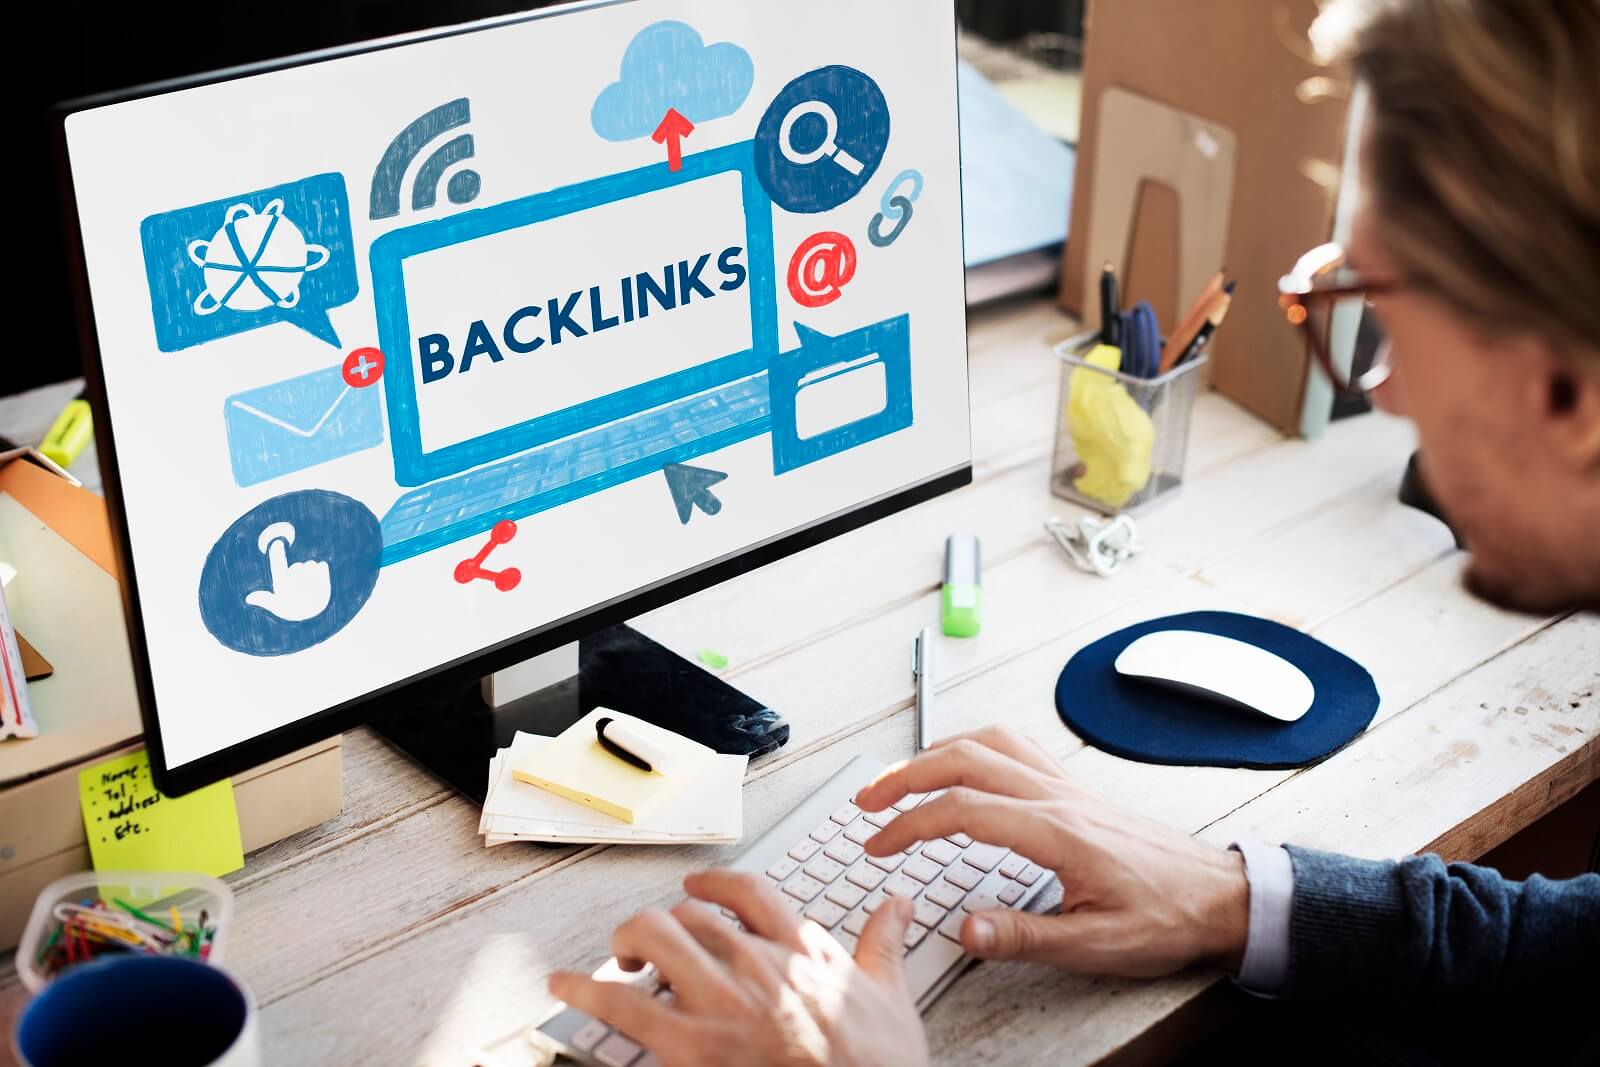 Backlinks Are Acquired Via Video Content